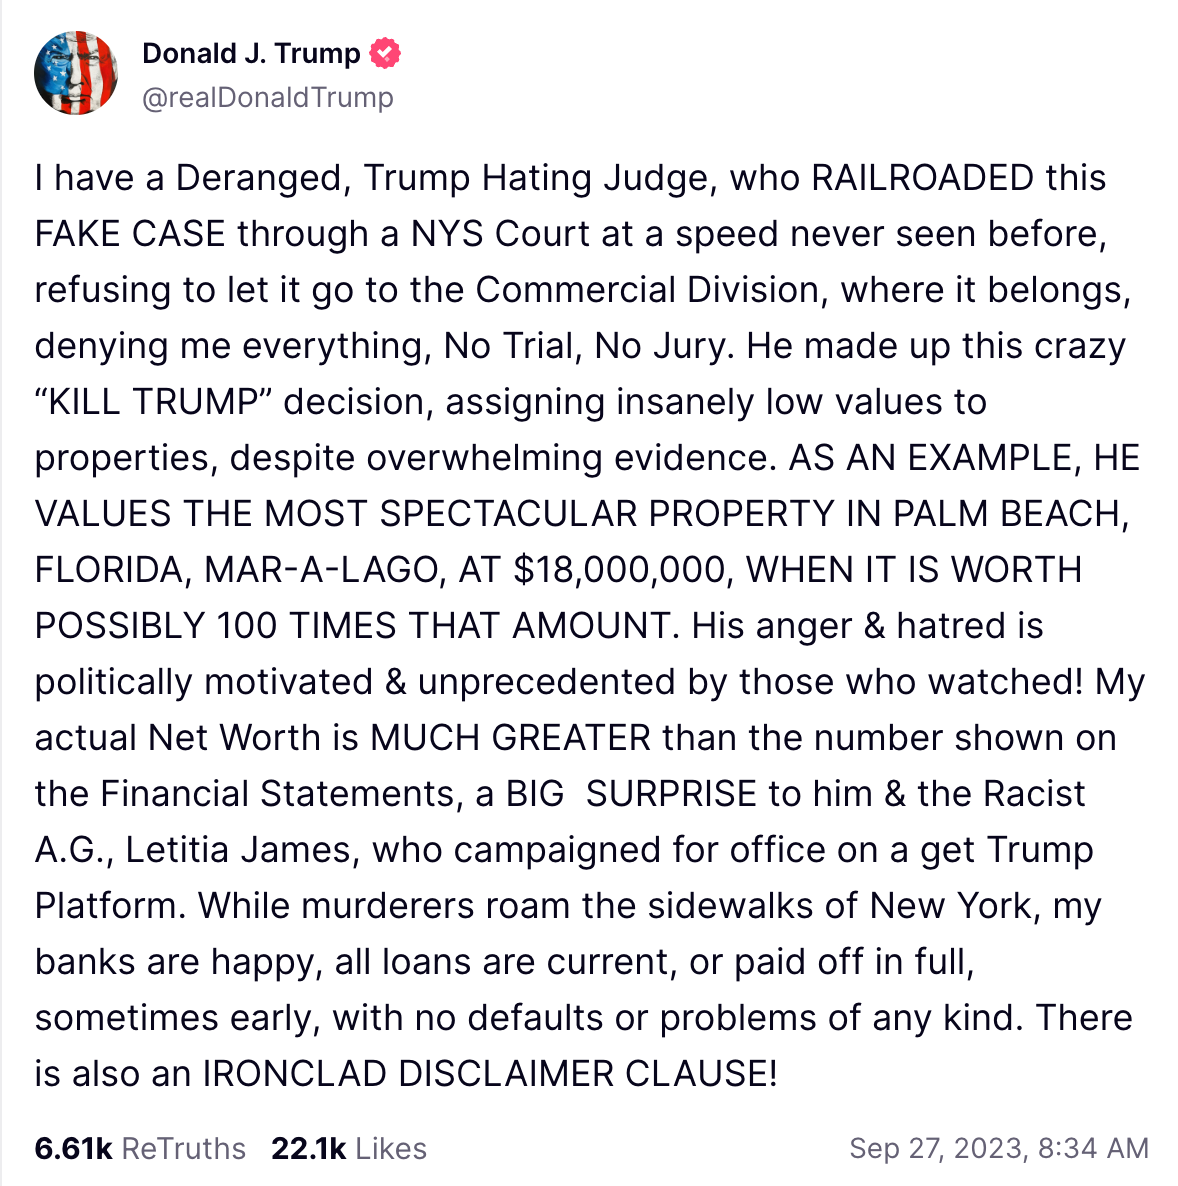 I have a Deranged, Trump Hating Judge, who RAILROADED this FAKE CASE through a NYS Court at a speed never seen before, refusing to let it go to the Commercial Division, where it belongs, denying me everything, No Trial, No Jury. He made up this crazy “KILL TRUMP” decision, assigning insanely low values to properties, despite overwhelming evidence. AS AN EXAMPLE, HE VALUES THE MOST SPECTACULAR PROPERTY IN PALM BEACH, FLORIDA, MAR-A-LAGO, AT $18,000,000, WHEN IT IS WORTH POSSIBLY 100 TIMES THAT AMOUNT. His anger & hatred is politically motivated & unprecedented by those who watched! My actual Net Worth is MUCH GREATER than the number shown on the Financial Statements, a BIG  SURPRISE to him & the Racist A.G., Letitia James, who campaigned for office on a get Trump Platform. While murderers roam the sidewalks of New York, my banks are happy, all loans are current, or paid off in full, sometimes early, with no defaults or problems of any kind. There is also an IRONCLAD DISCLAIMER CLAUSE!